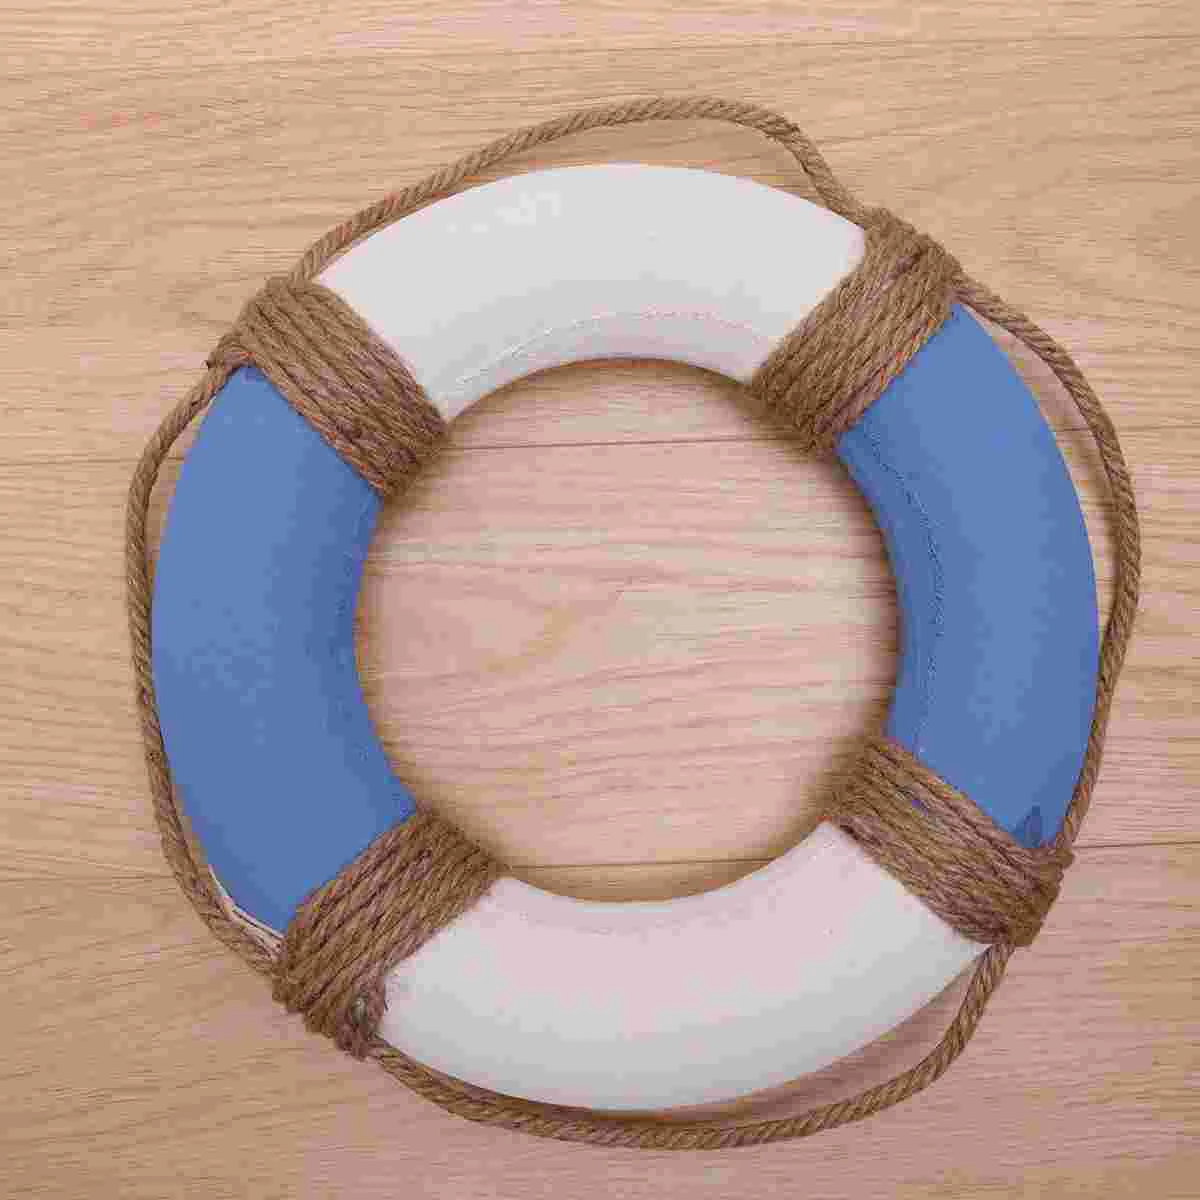 

Life Ring Wall Nautical Hanging Lifebuoy Decor Decoration Welcome Sign Decorative Door Beach Buoy Ornament Home Mediterranean